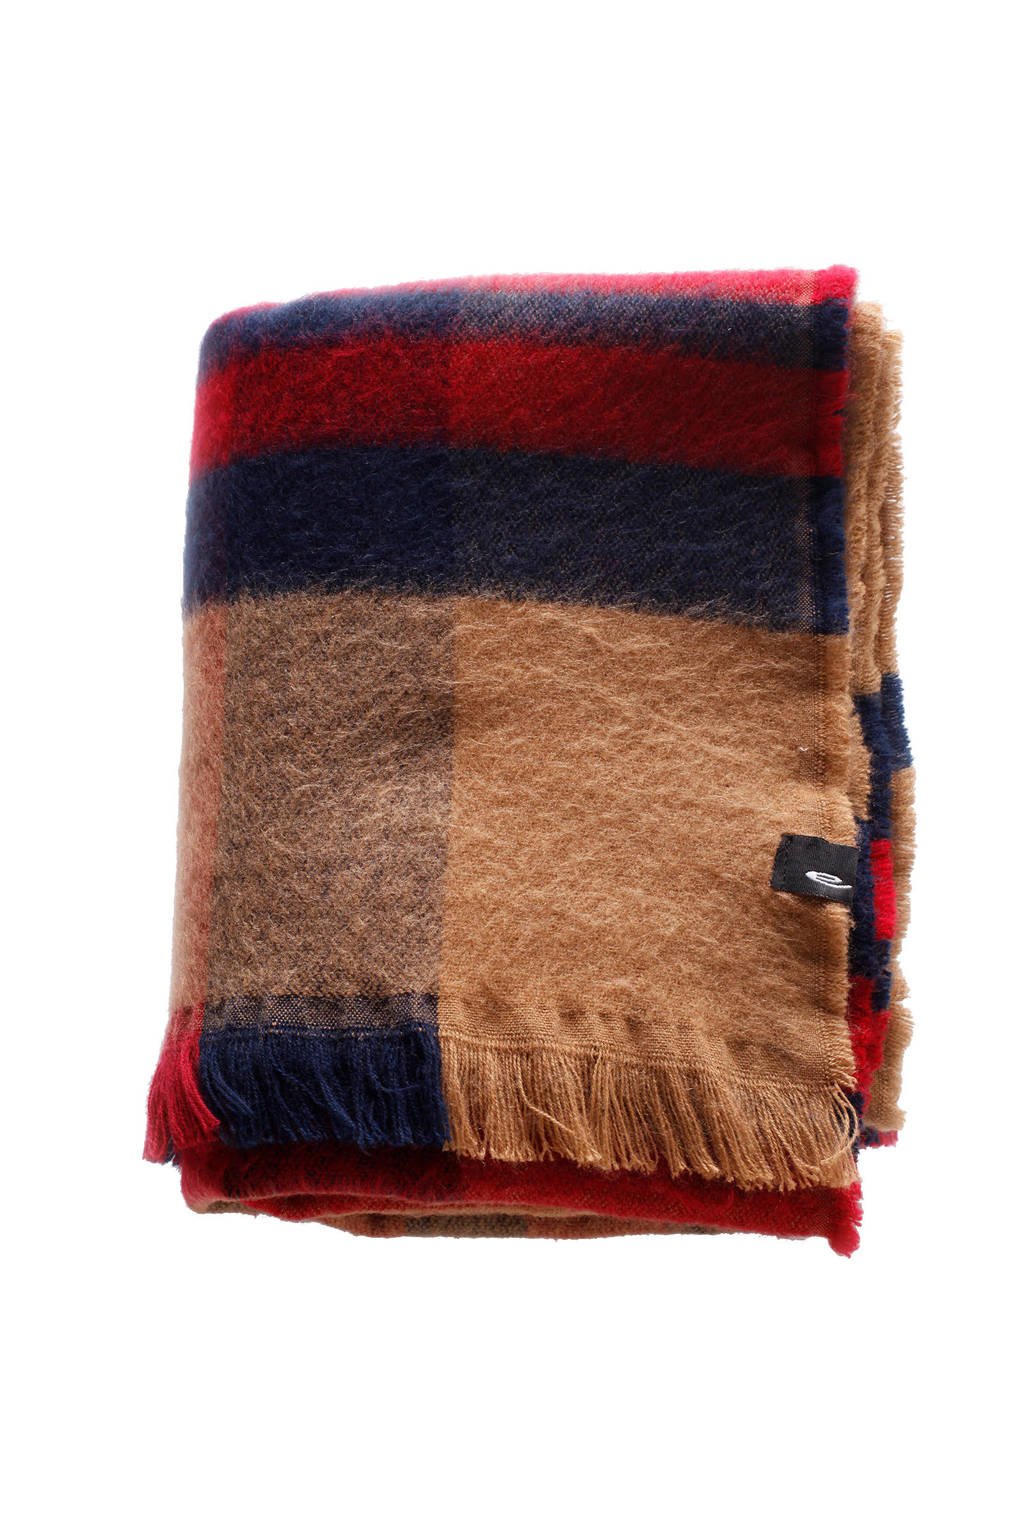 Expresso geruite sjaal camel/rood, camel/rood/donkerblauw